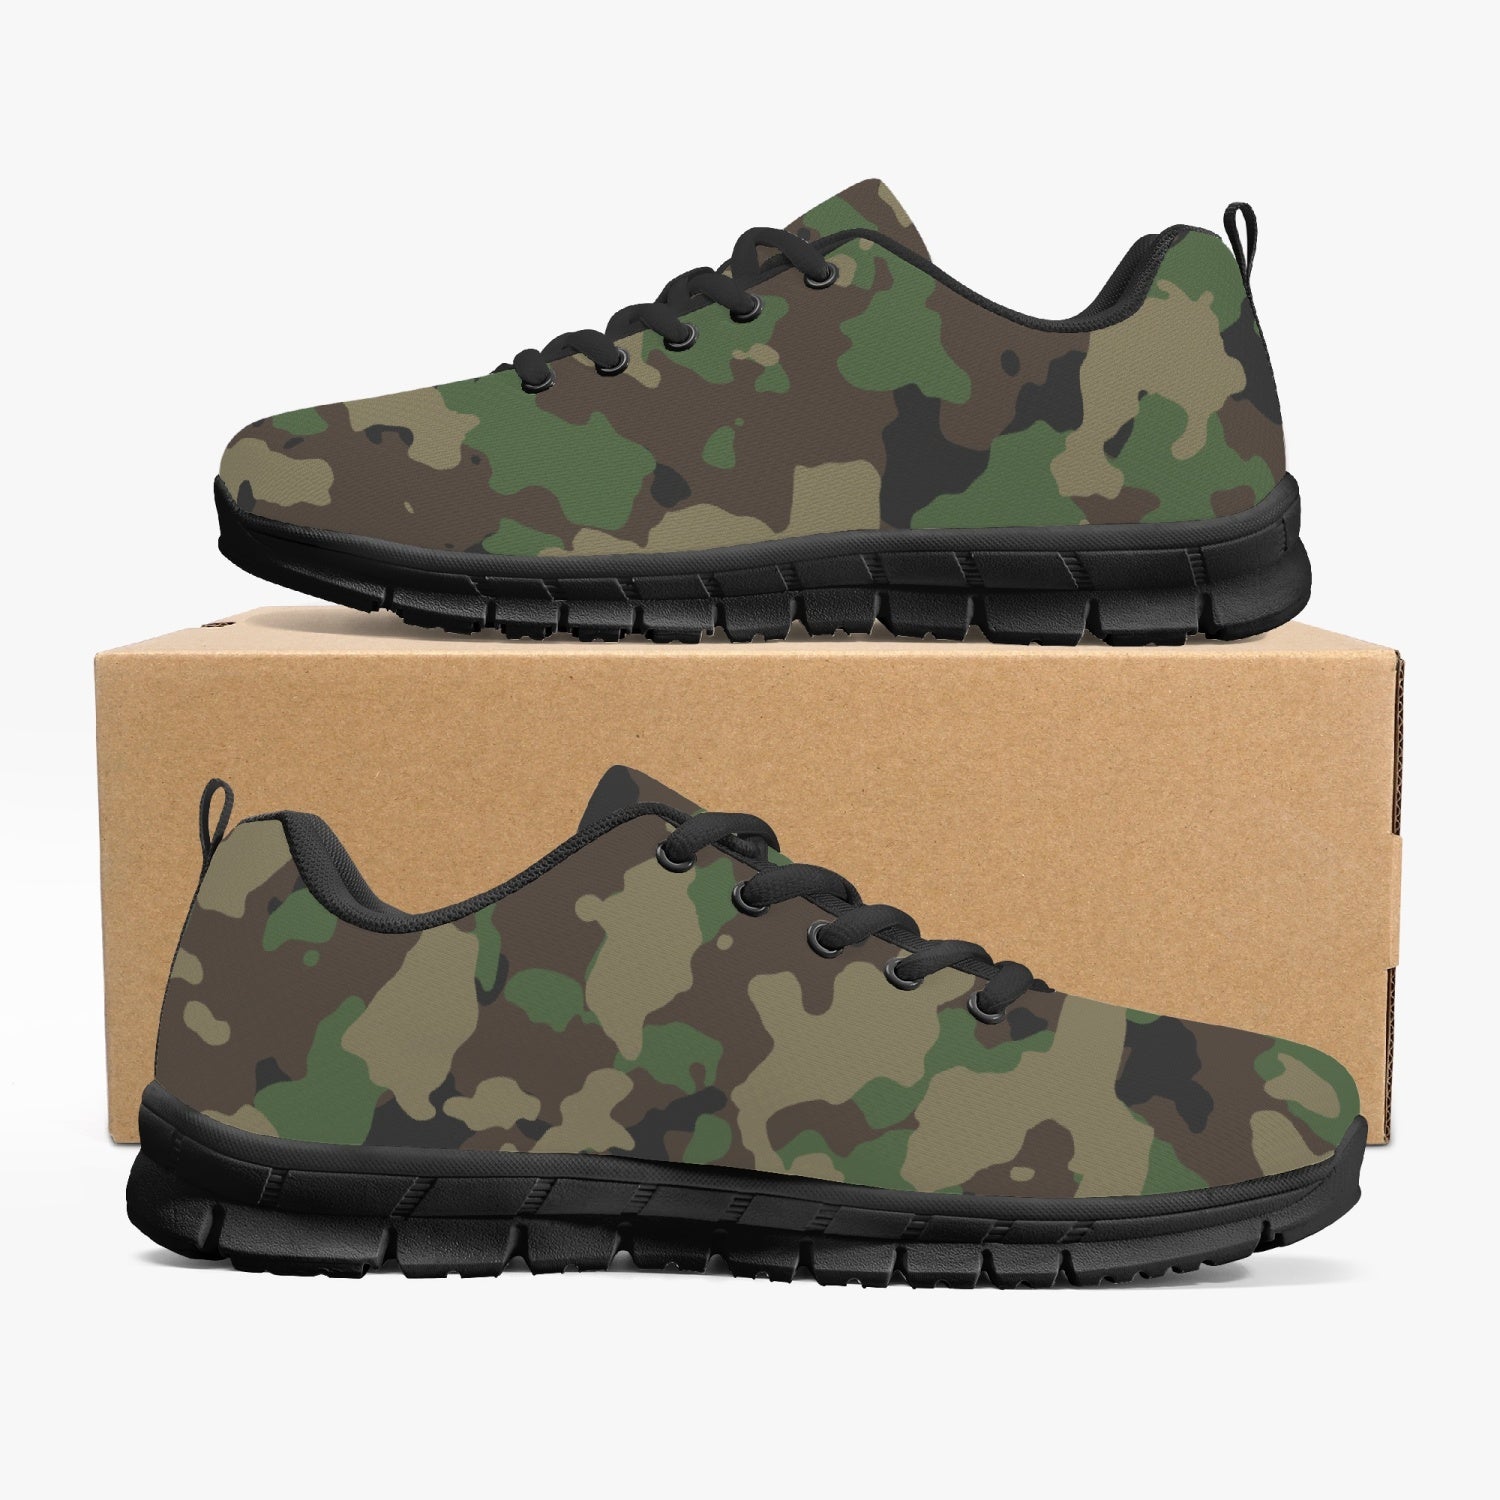 Classic Army Woodland Forest Camouflage Running Sneakers Shoes